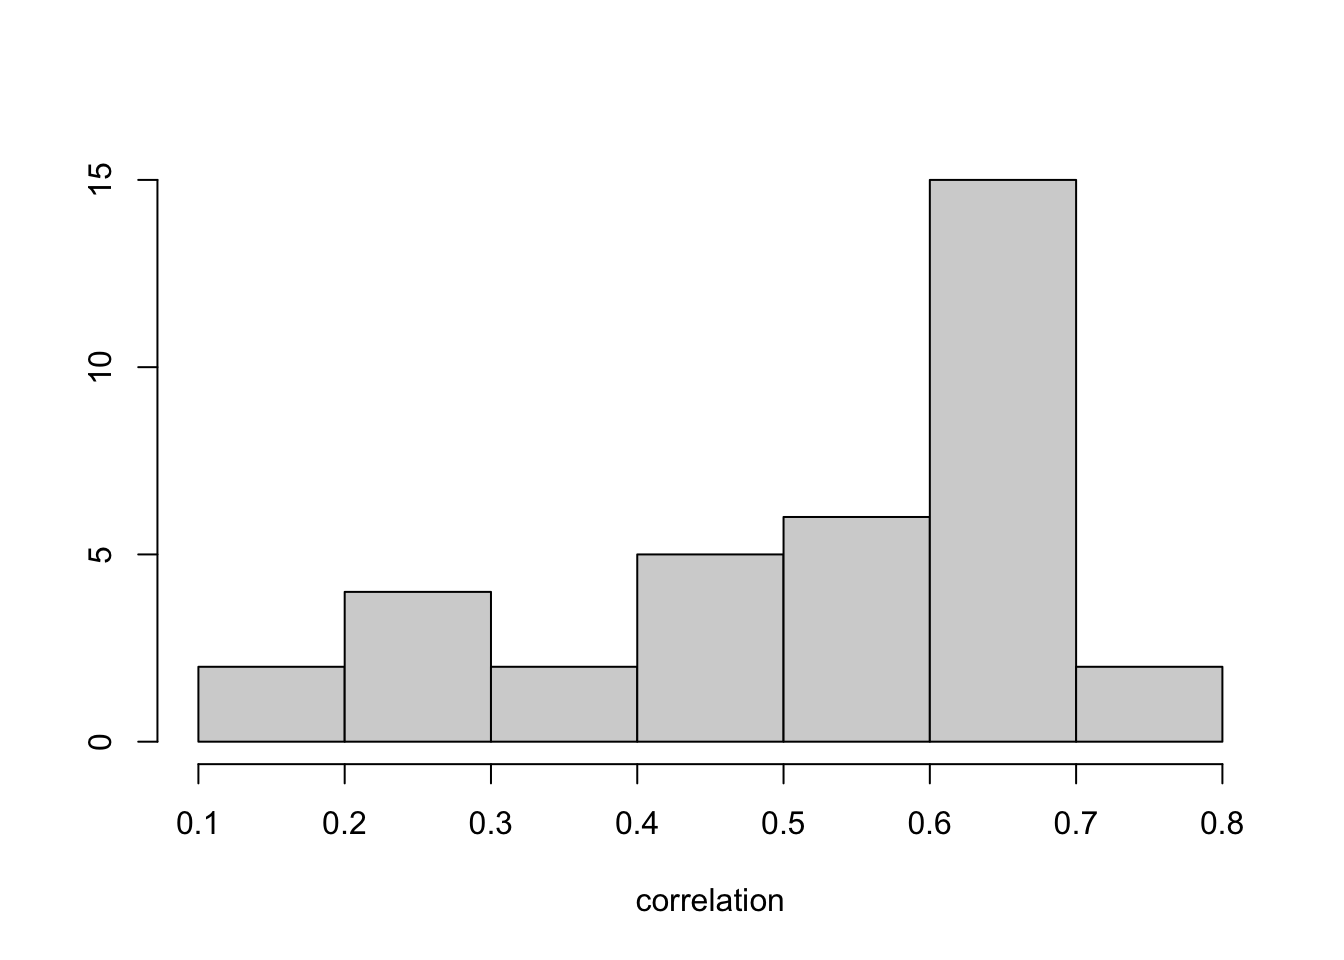 Histogram of correlations between residuals of TNC and Taxi usage after fitting Model Z1 across taxi zones.